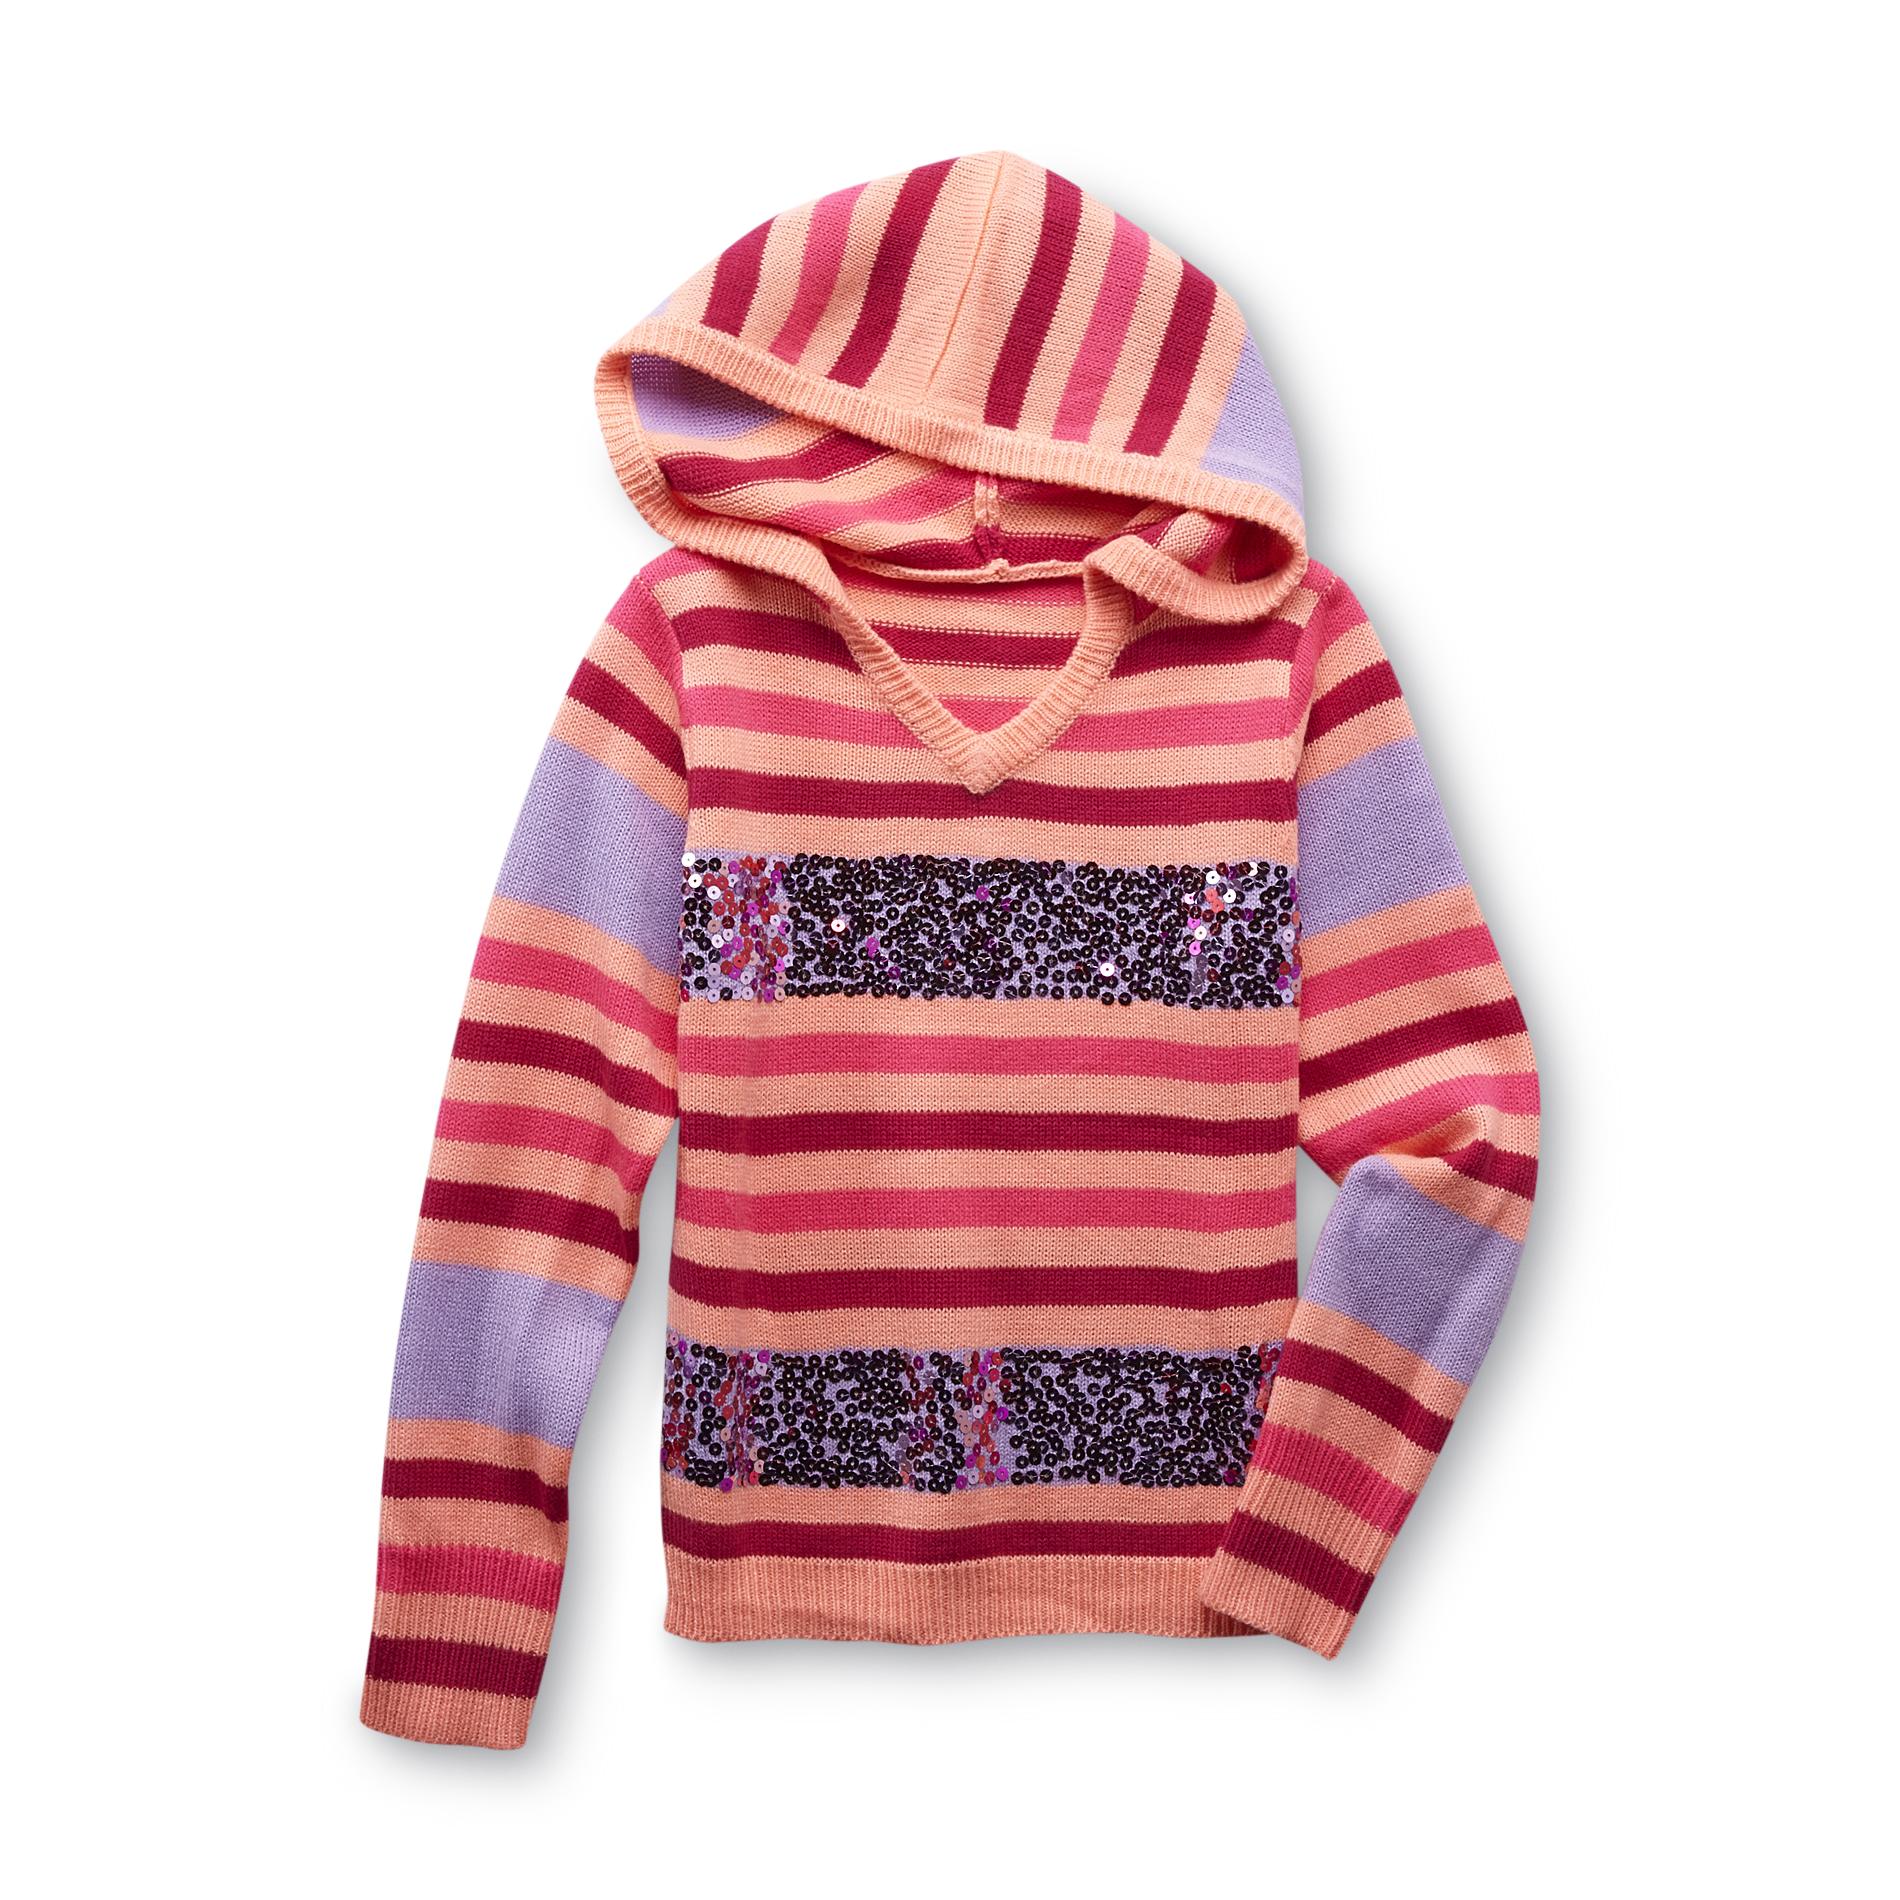 Piper Girl's Embellished Hooded Sweater - Striped